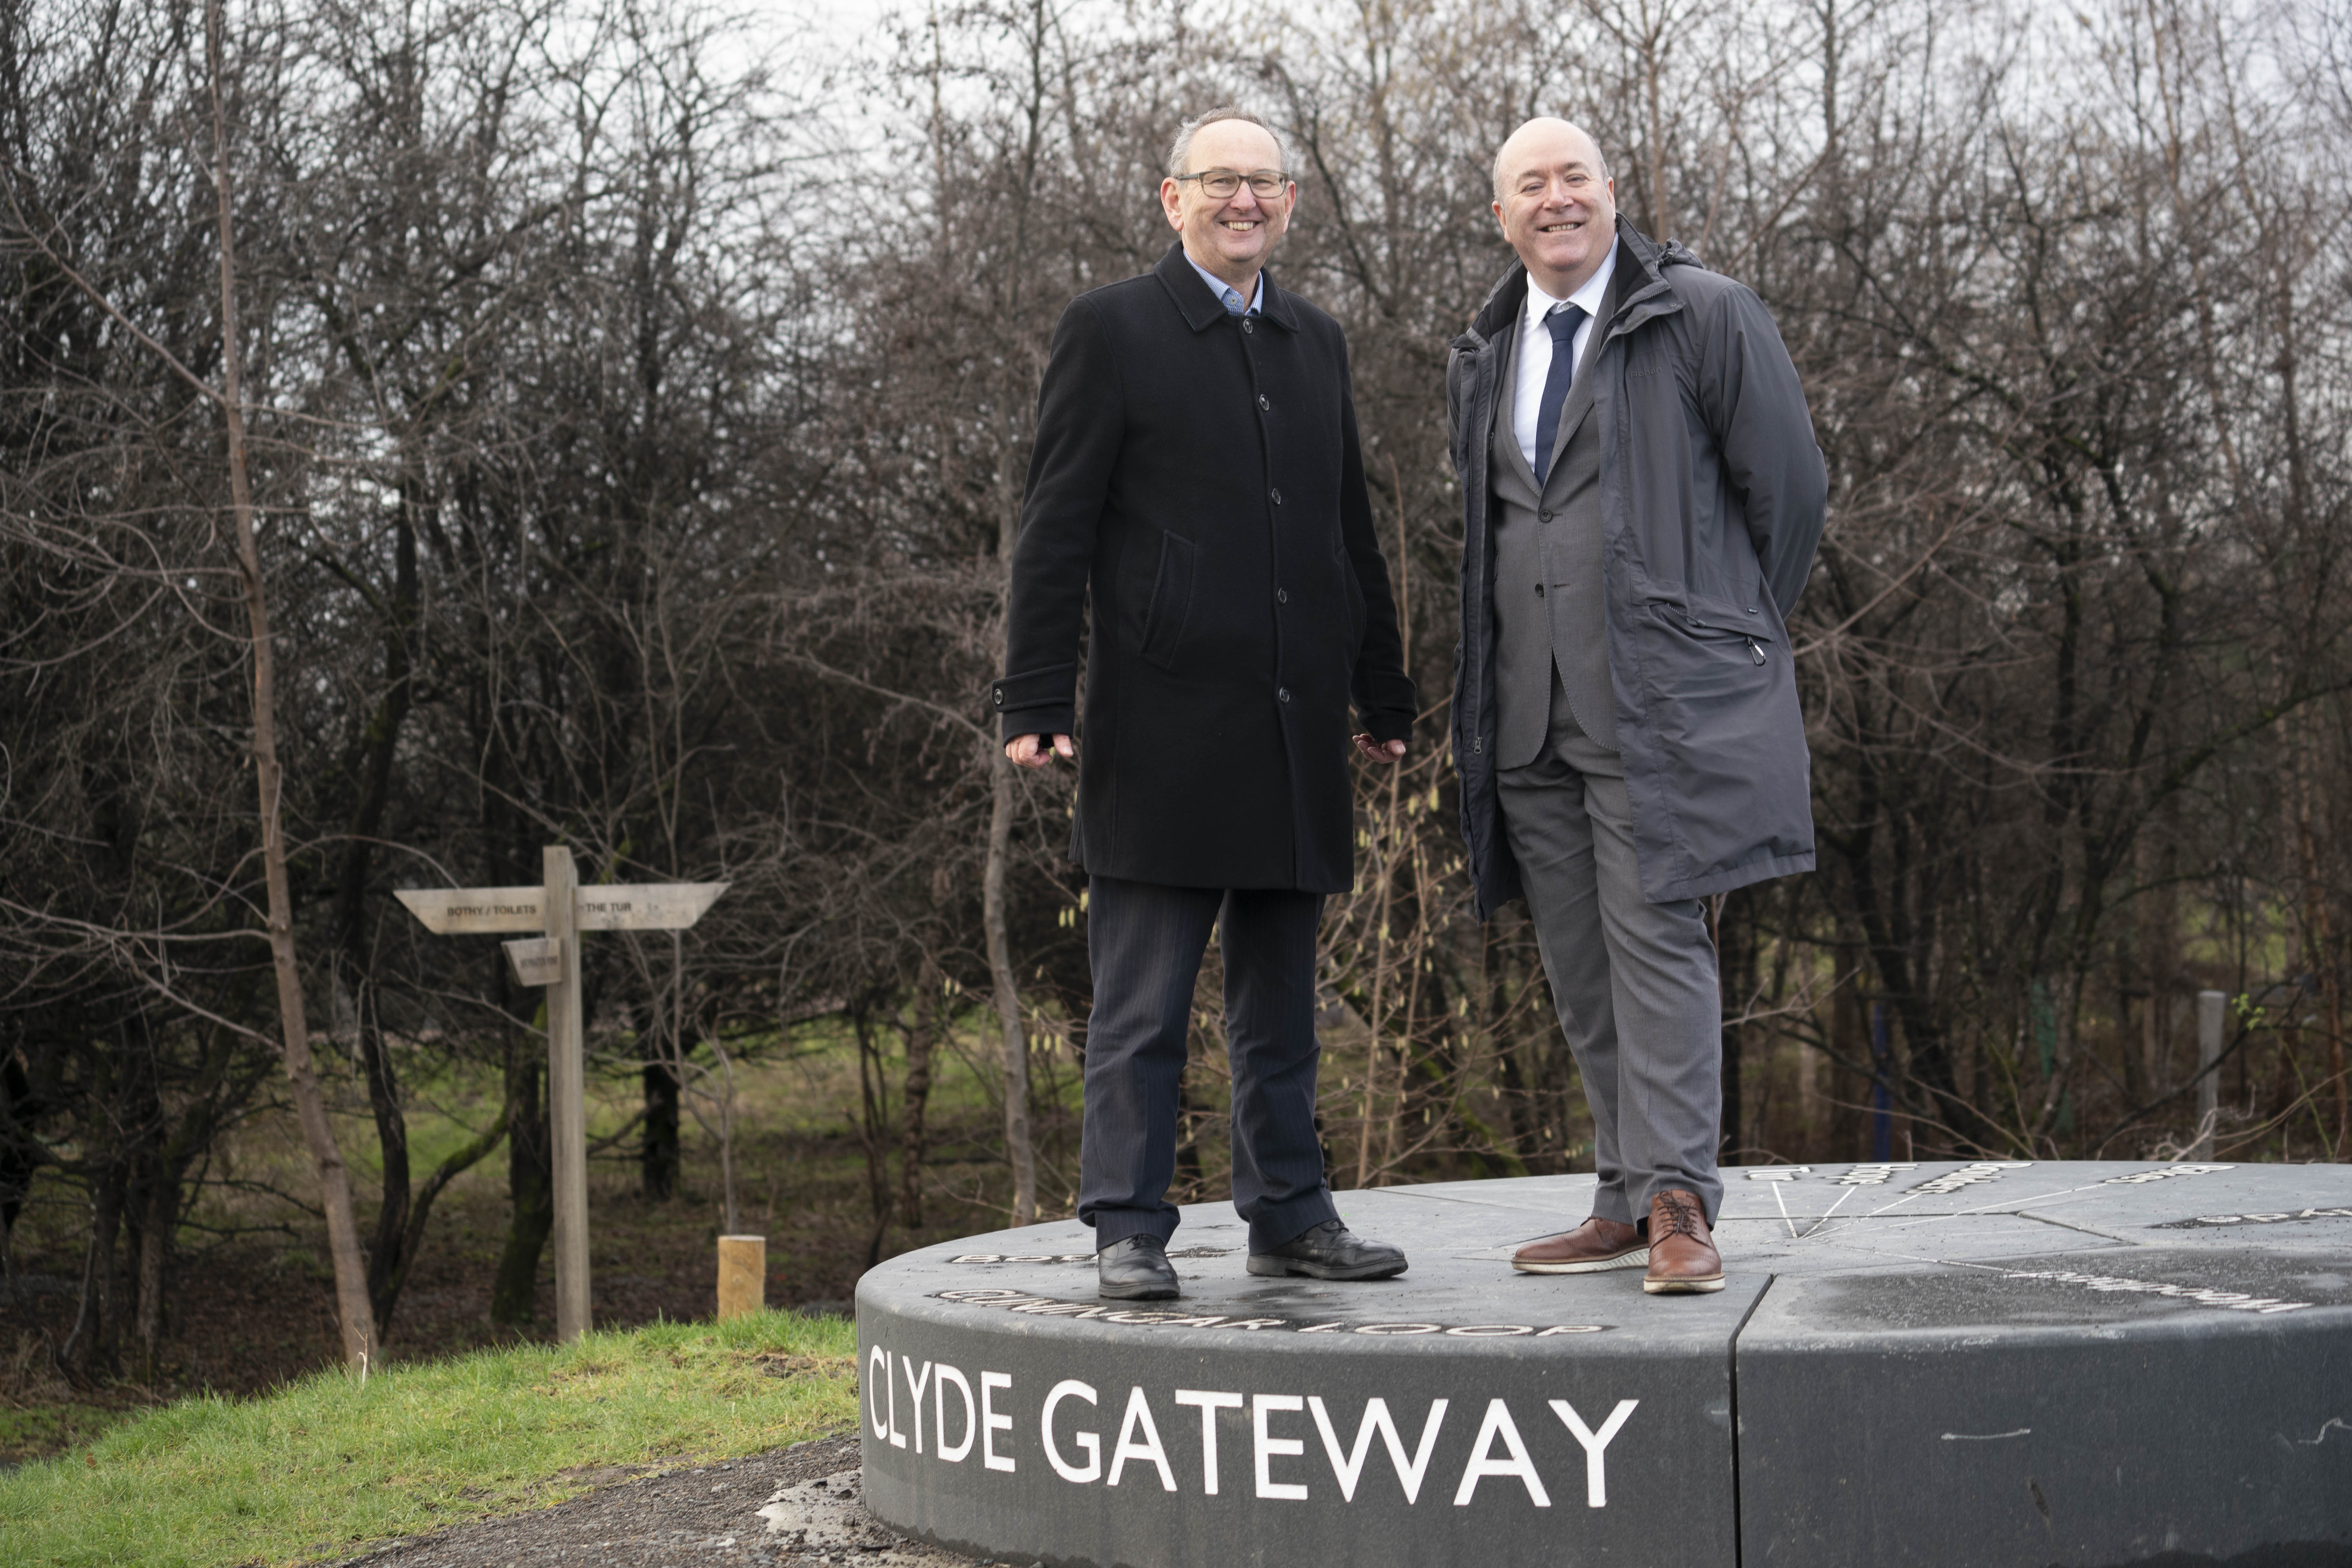 Clyde Gateway chief executive retires after almost 15 years in charge